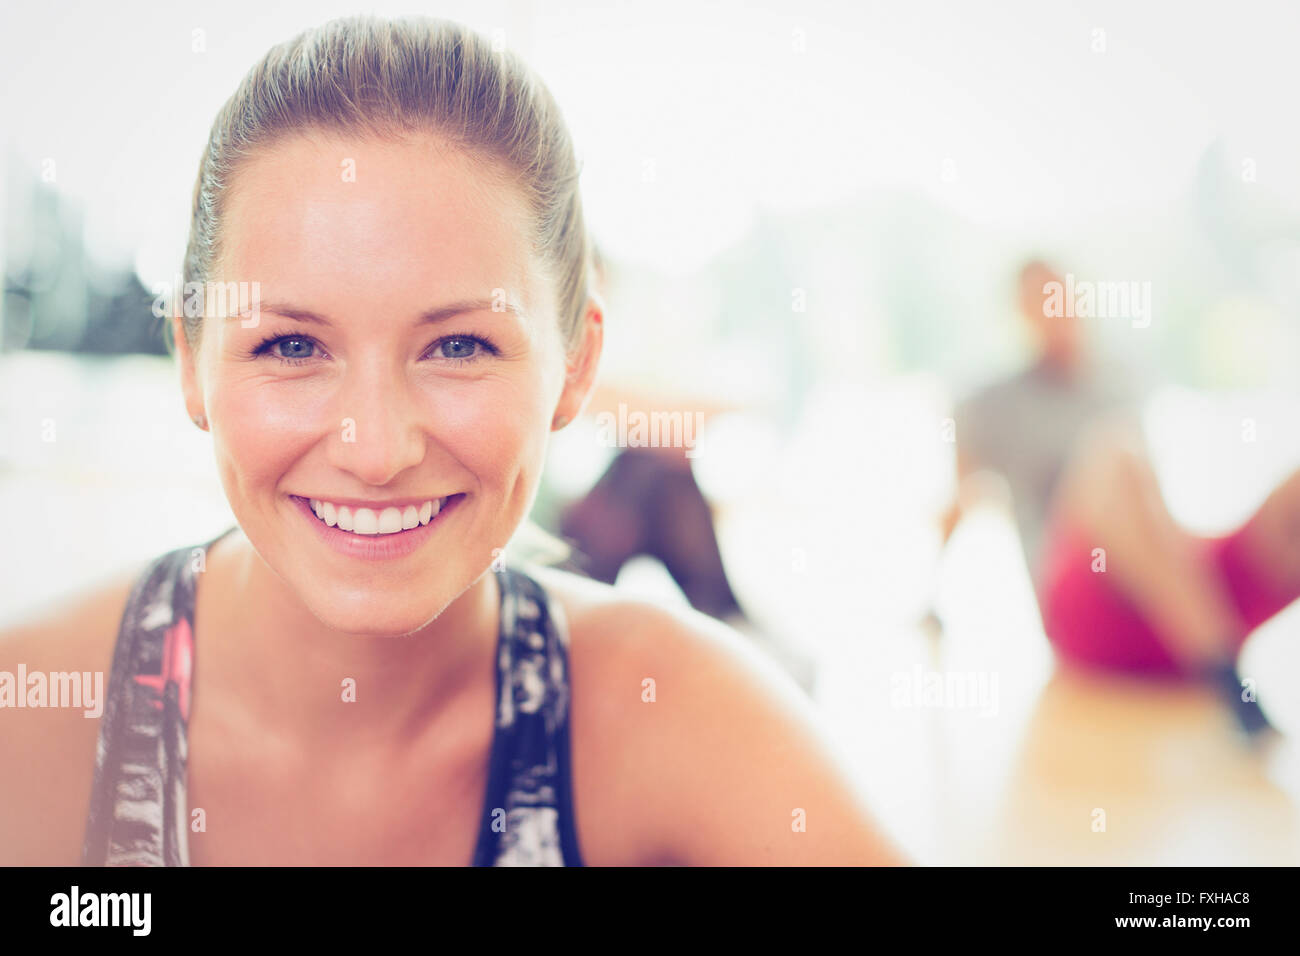 Close up portrait smiling woman in exercise class Stock Photo